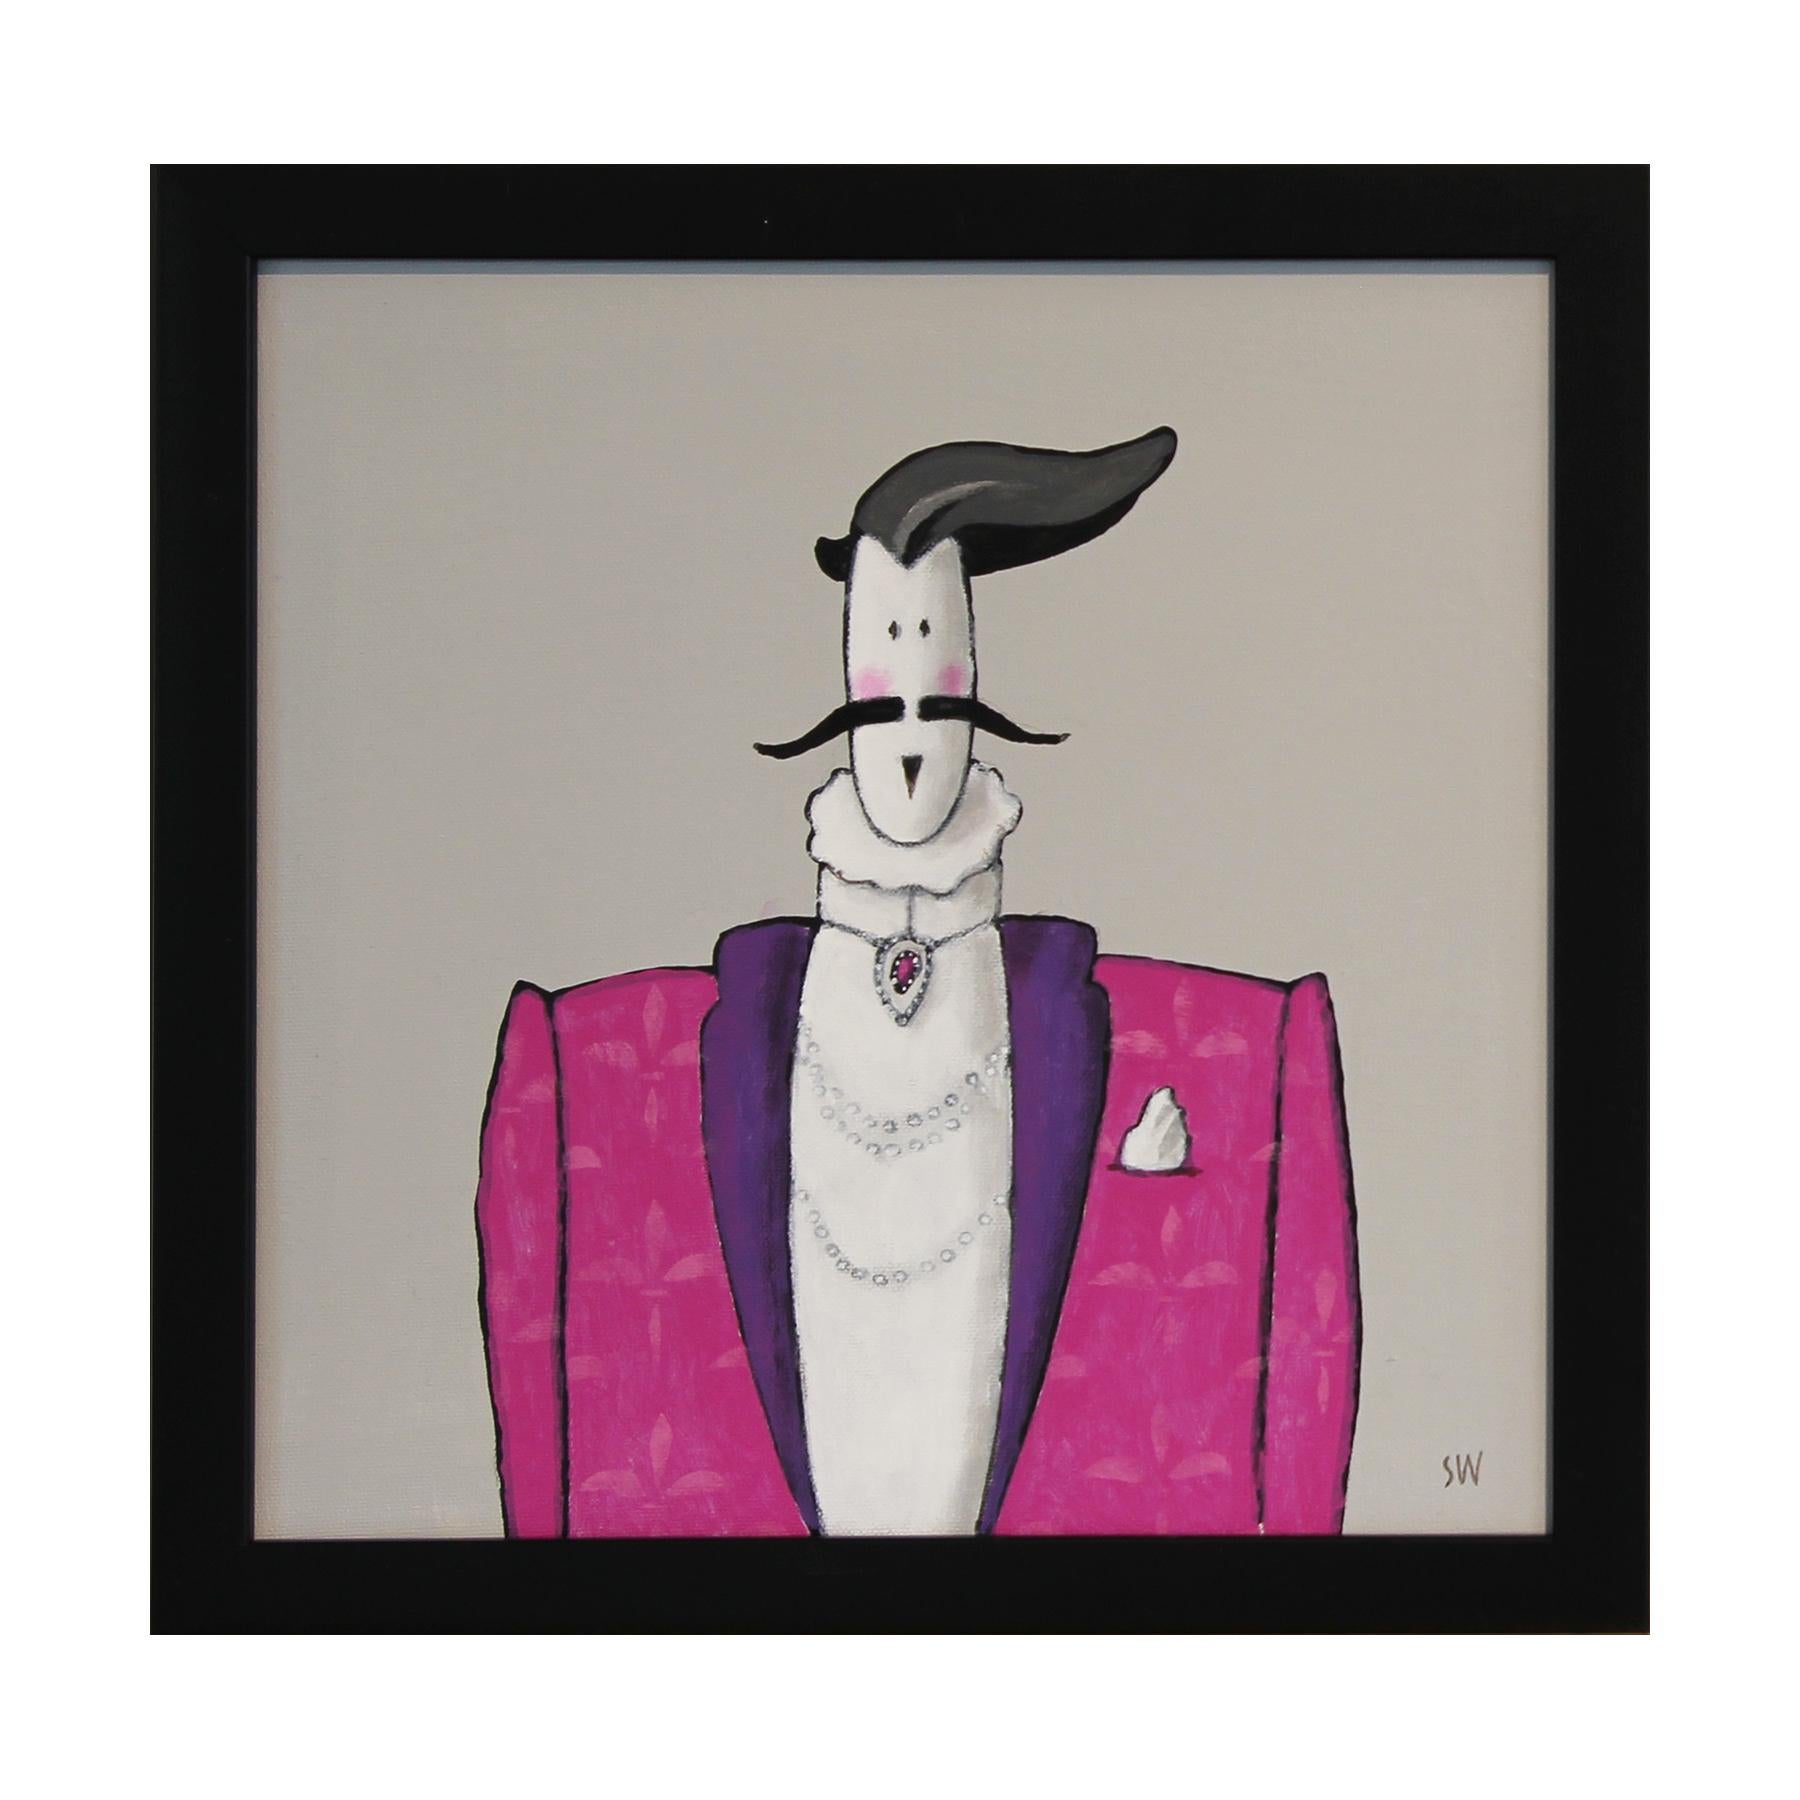 Scott Woodard Abstract Painting - “Mssr. Violette” Pink, Purple, and Grey Abstract Aristocratic Figure Painting